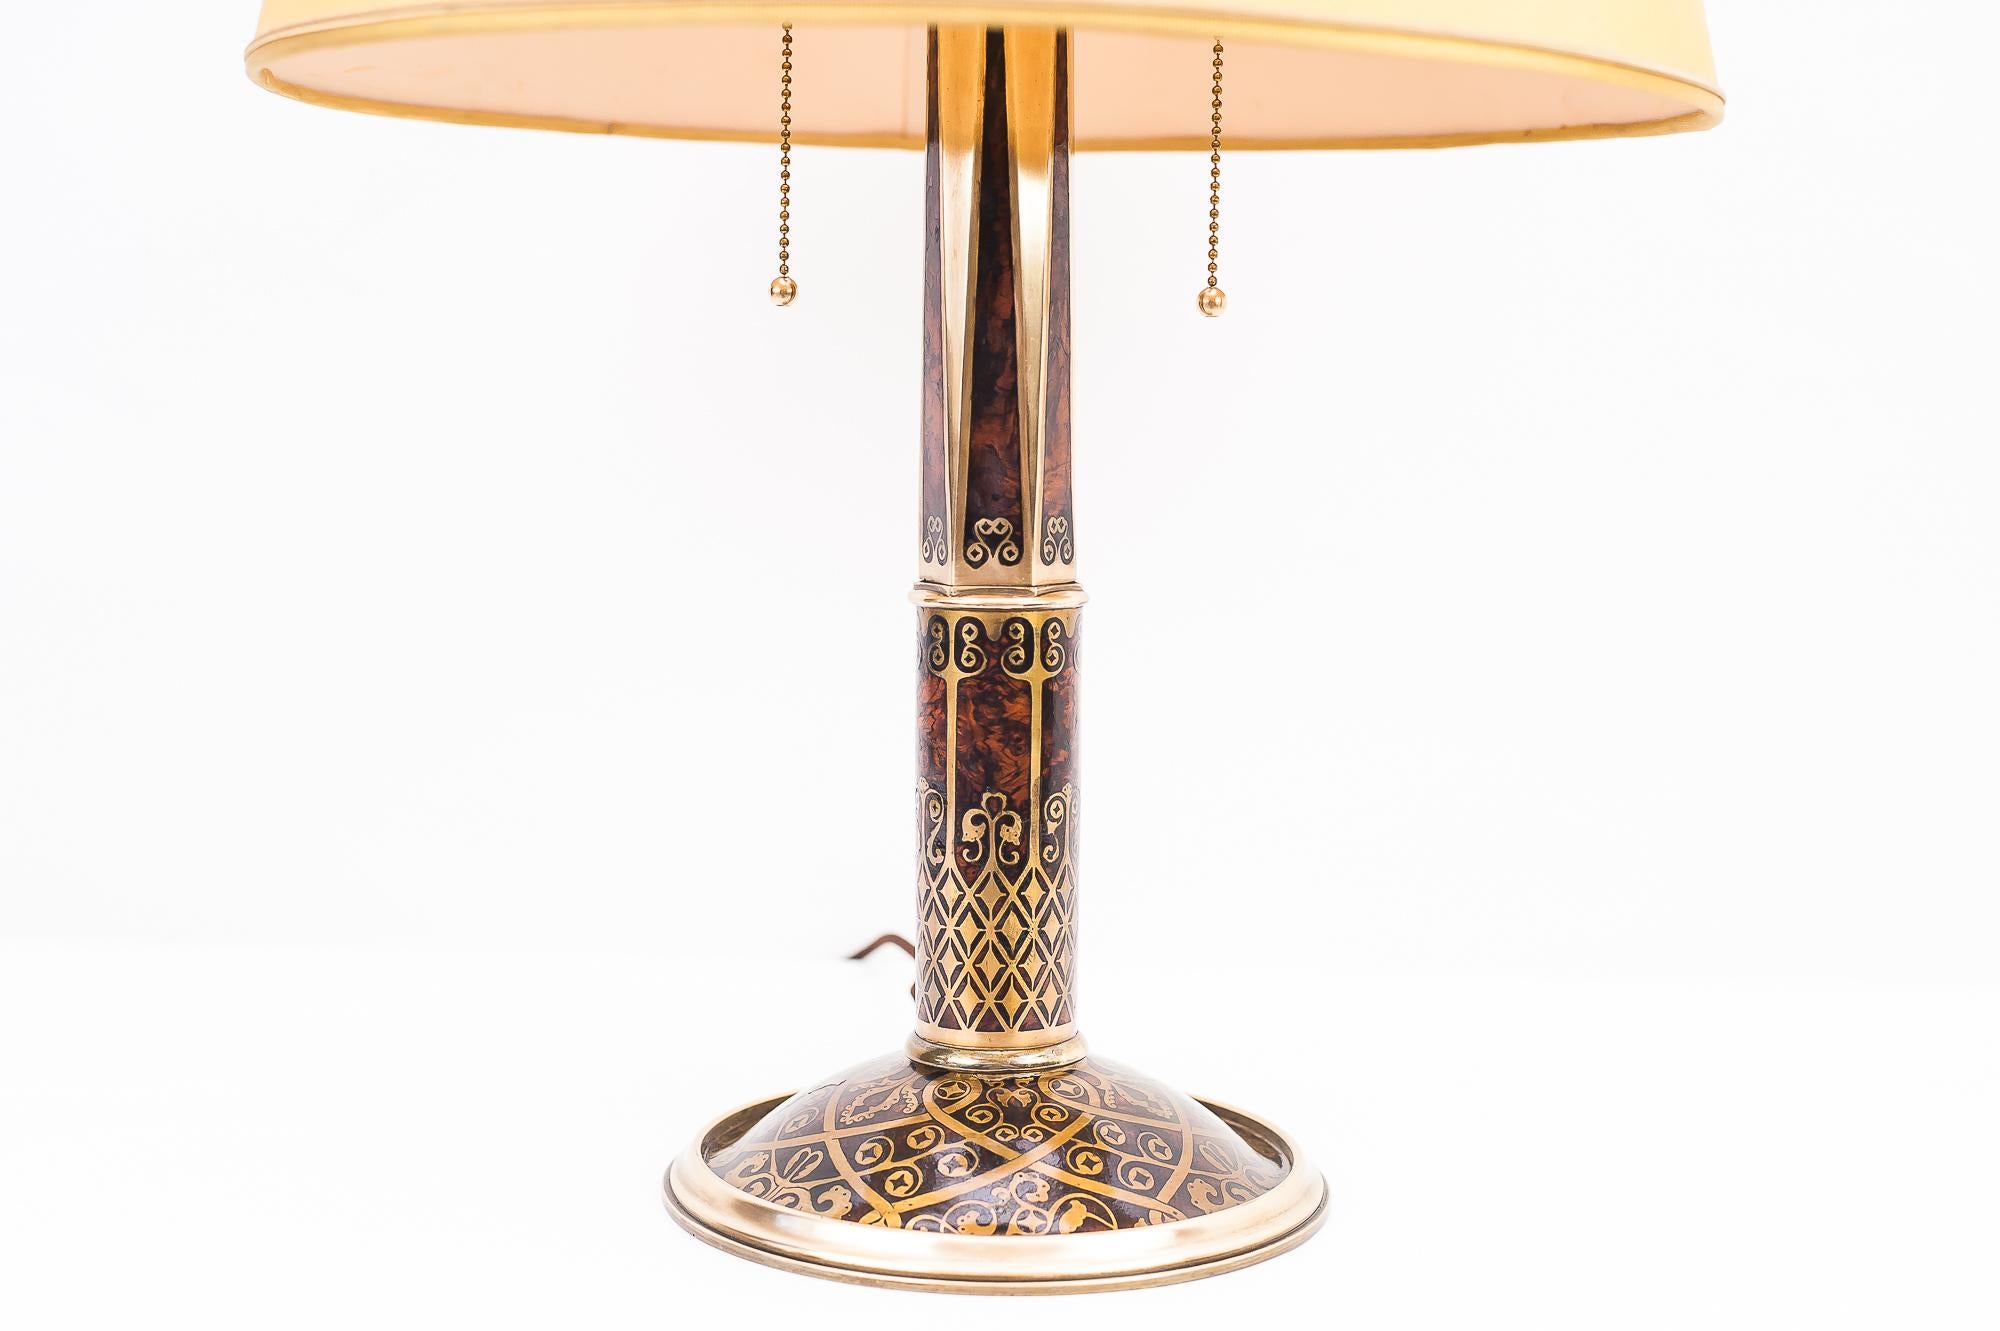 Fa. Erhard & Söhne, Schwäbisch Gmünd, circa 1920, brass with root wood inlays,
The fabric shade is not in a perfect condition, but it is original.

Original condition.